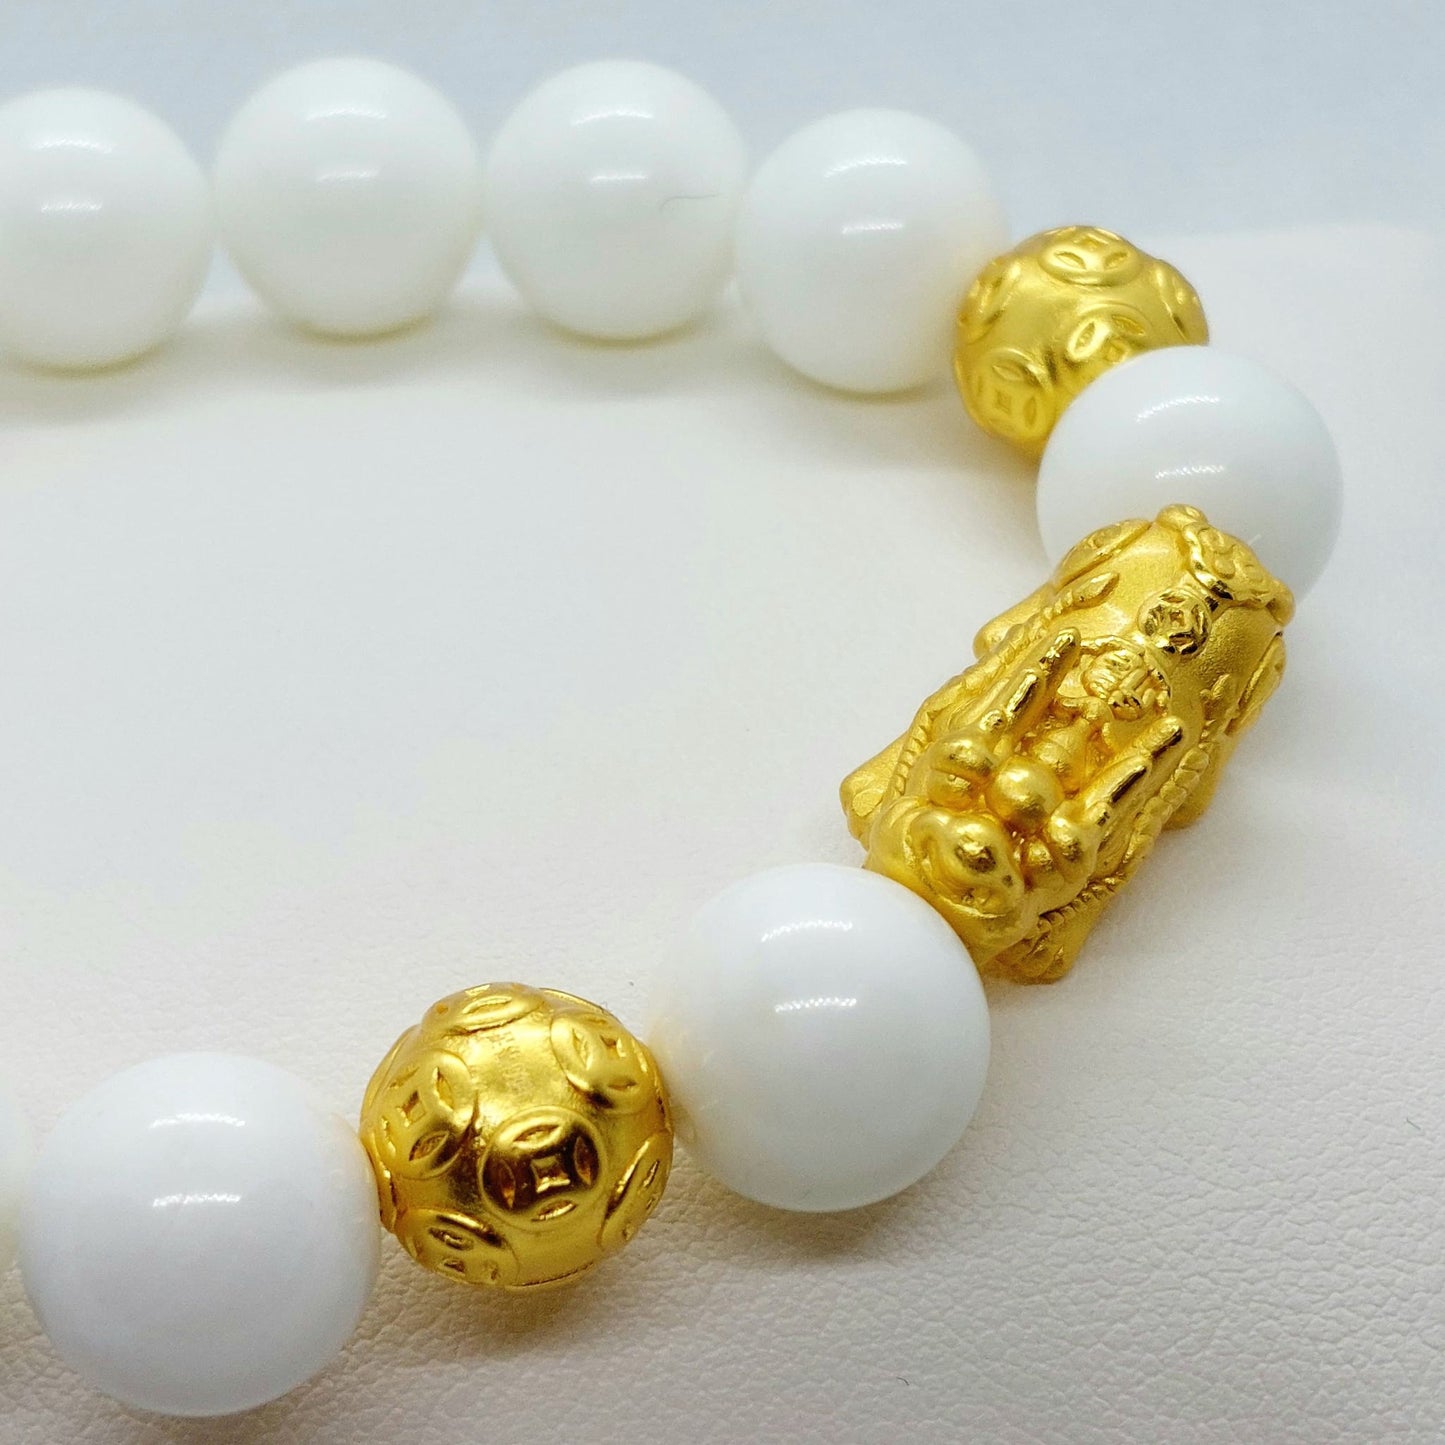 White Porcelain Stone Bracelet in 12mm Stones with Feng Shui